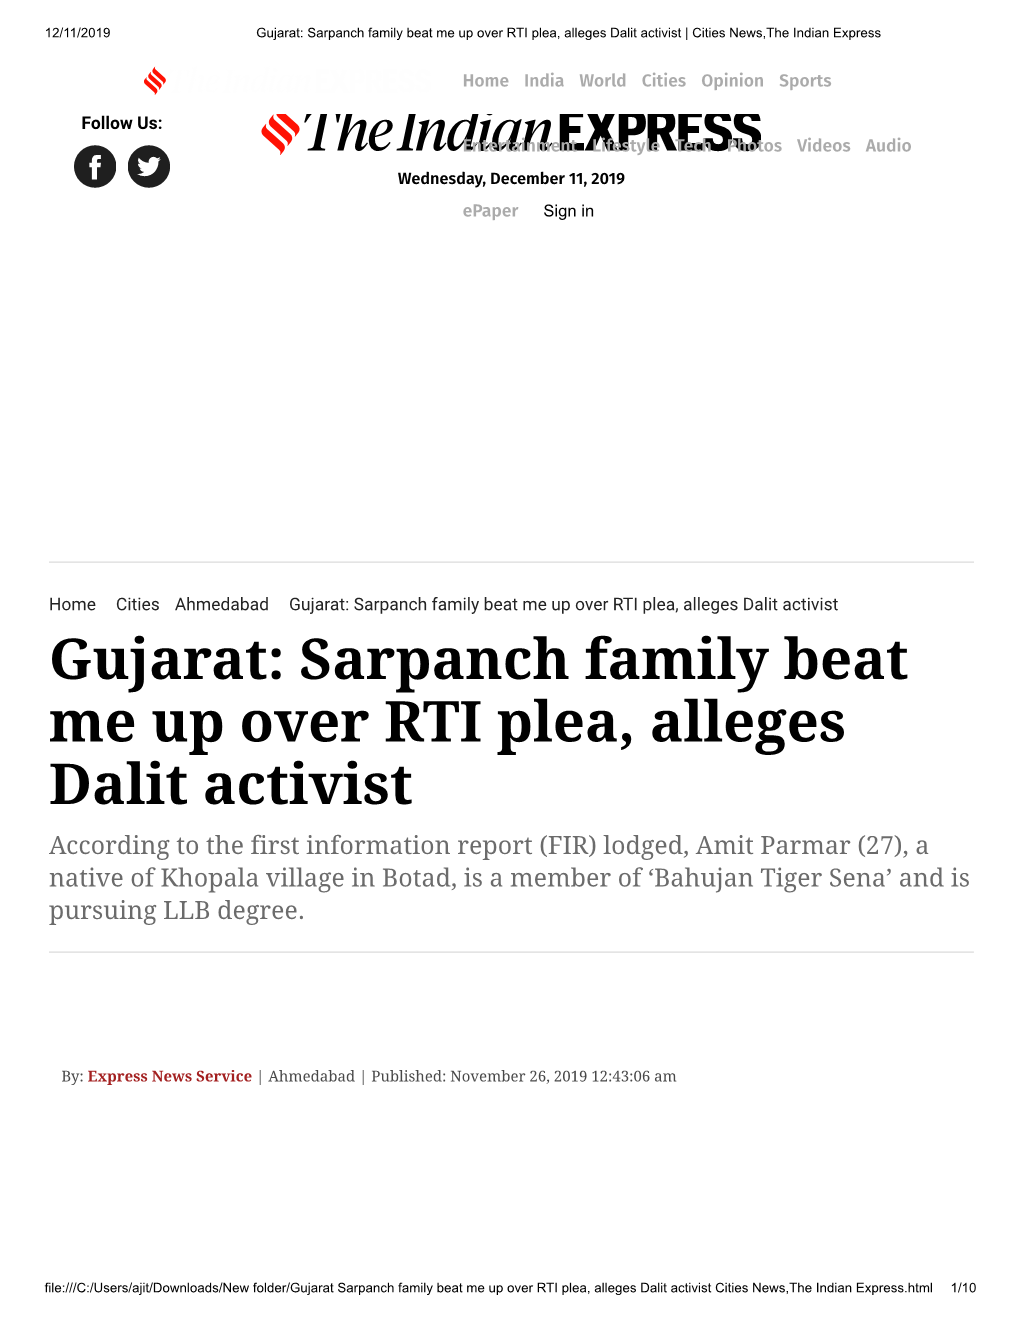 Gujarat: Sarpanch Family Beat Me up Over RTI Plea, Alleges Dalit Activist | Cities News,The Indian Express